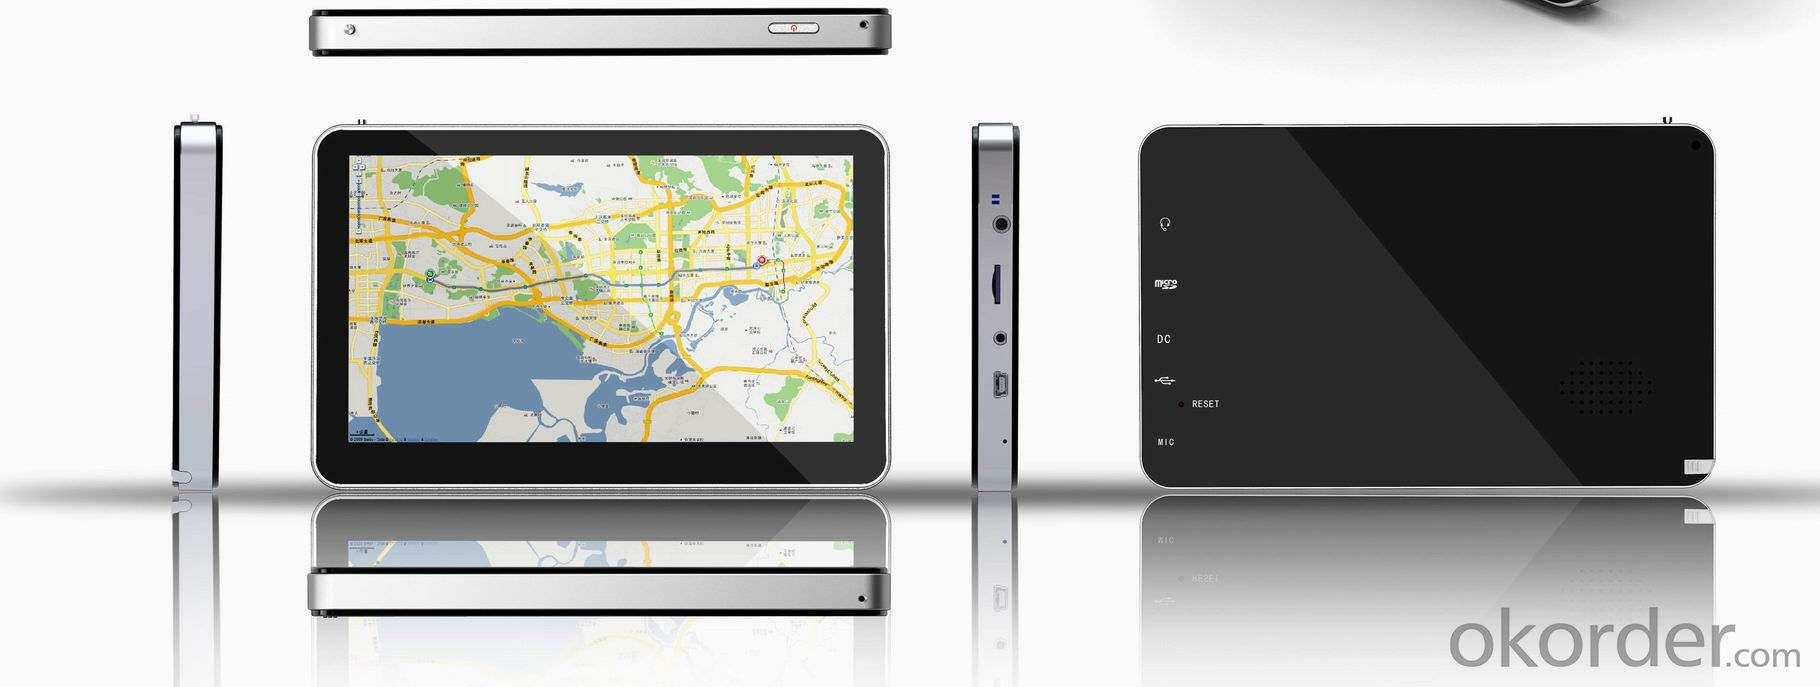 7 Inch GPS Touch-Screen GPS Navigator / Car GPS with free map